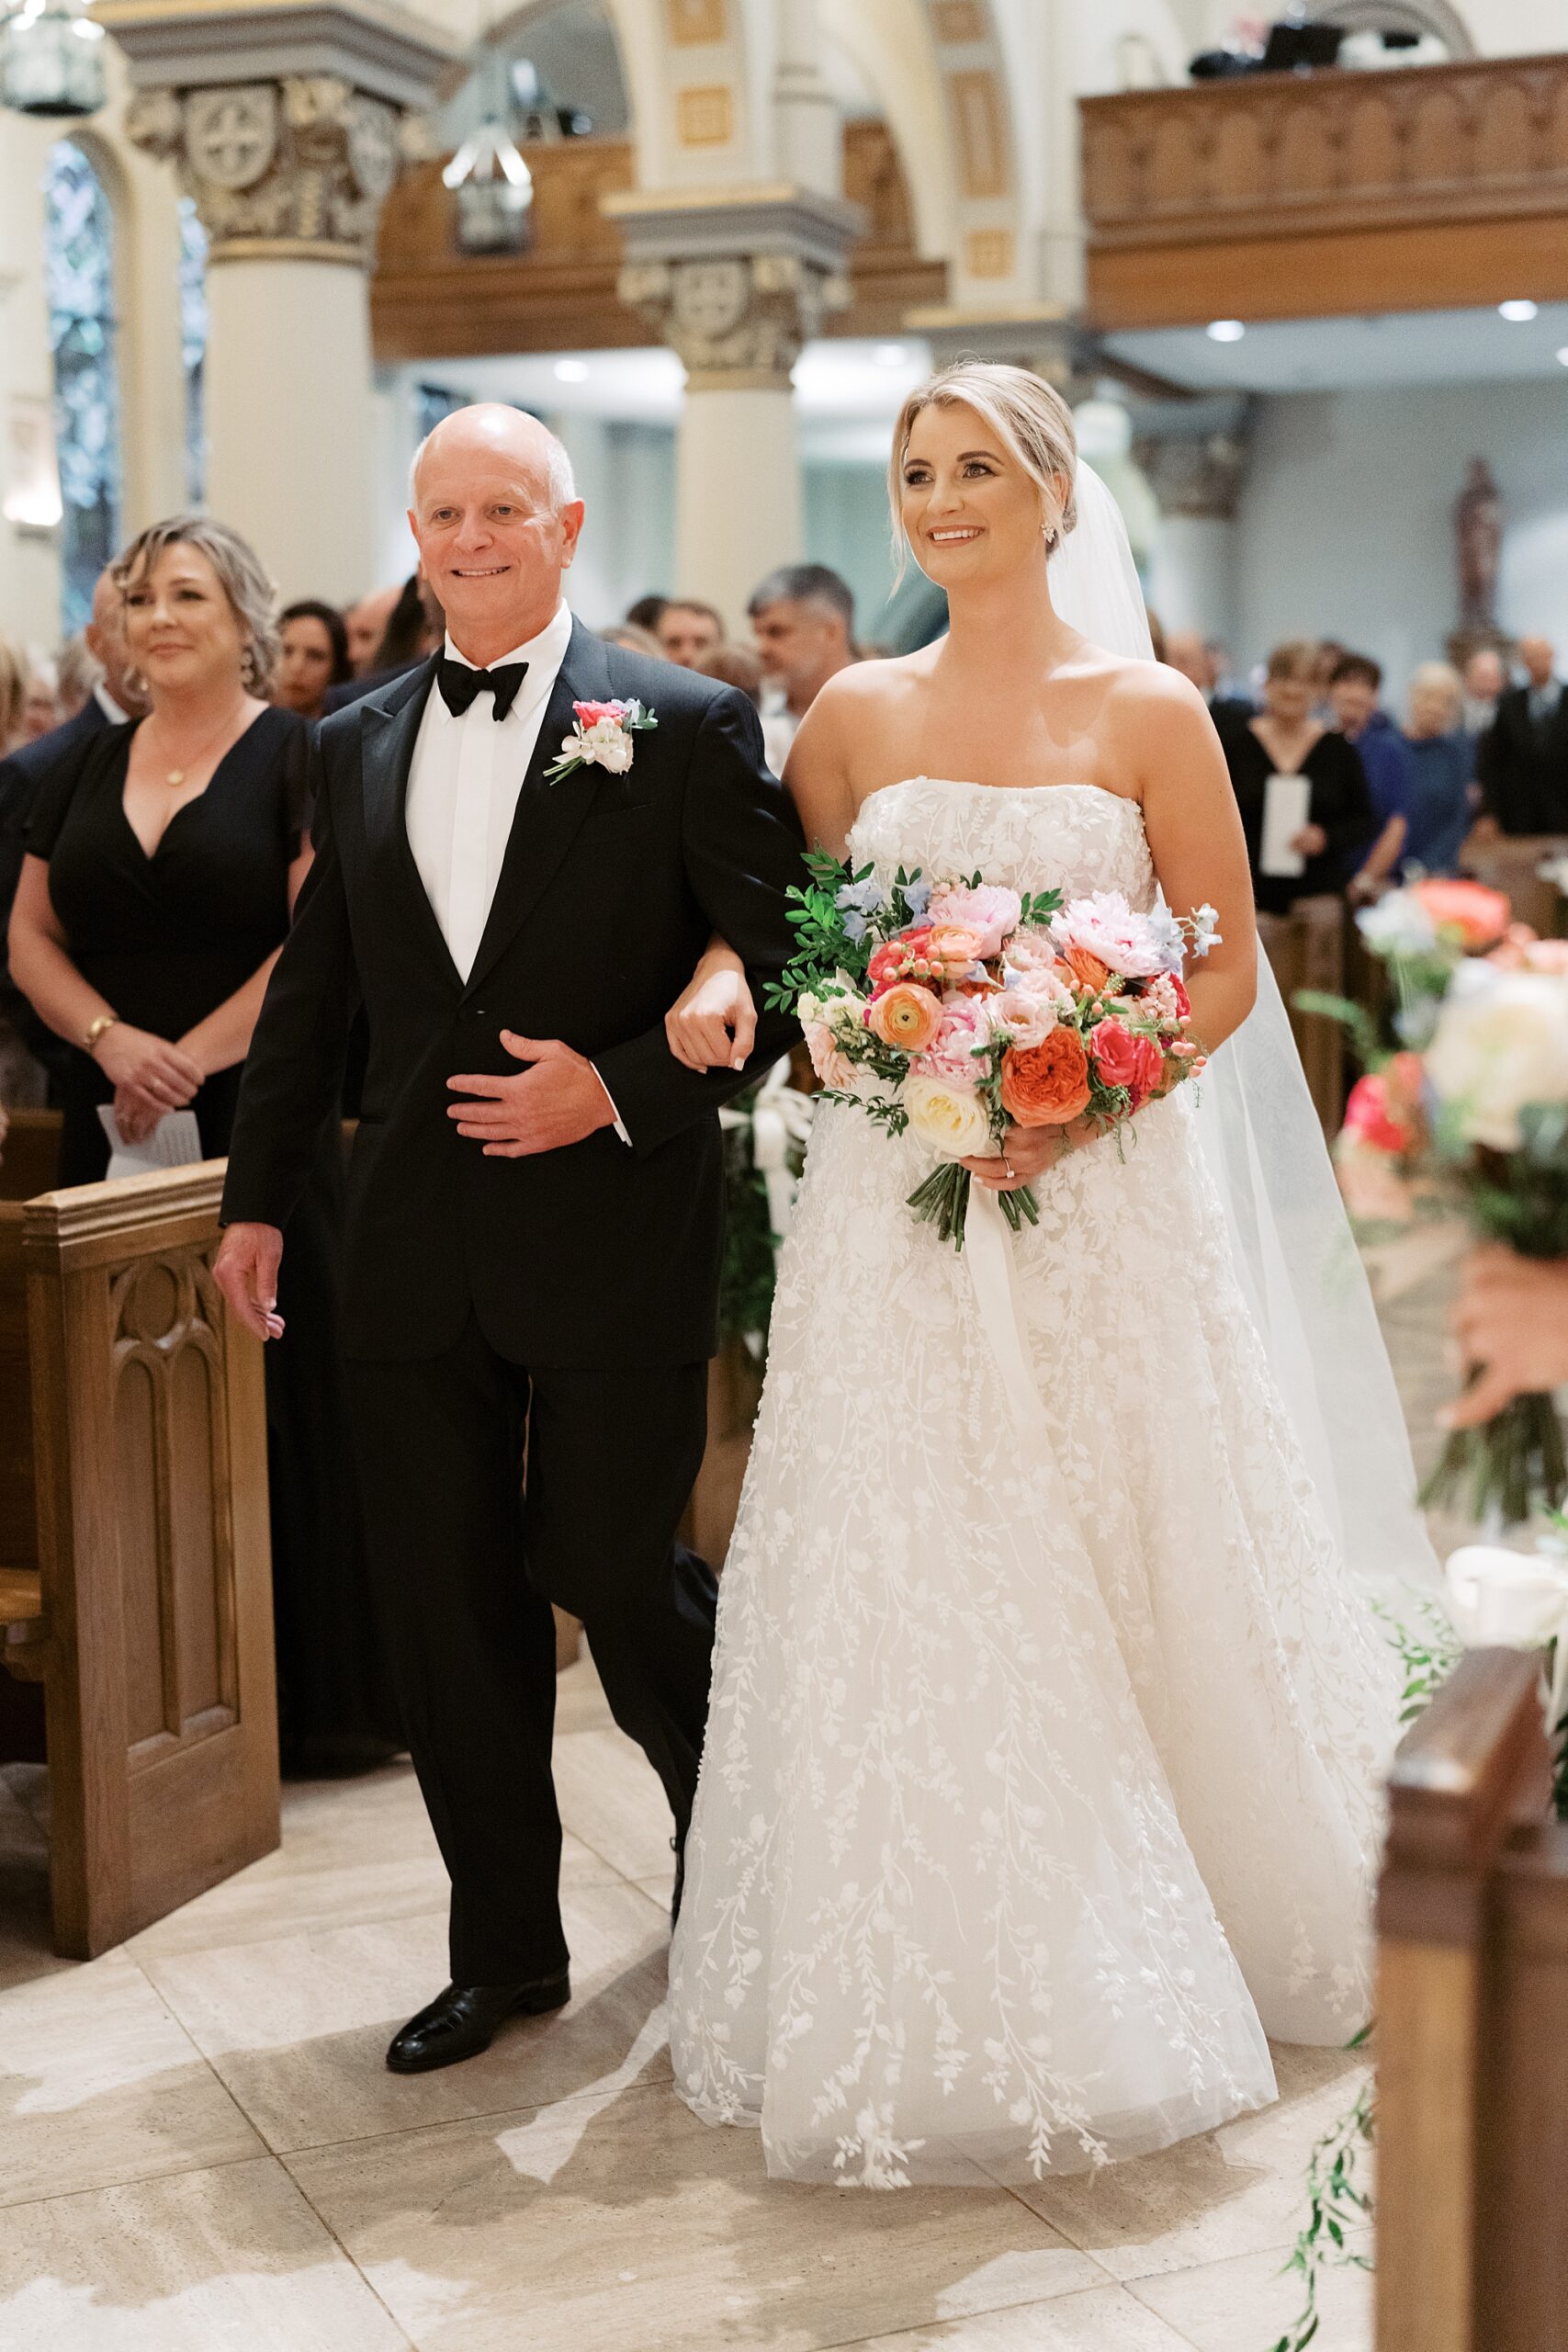 father walks bride down aisle inside the Cathedral of St. John the Evangelist